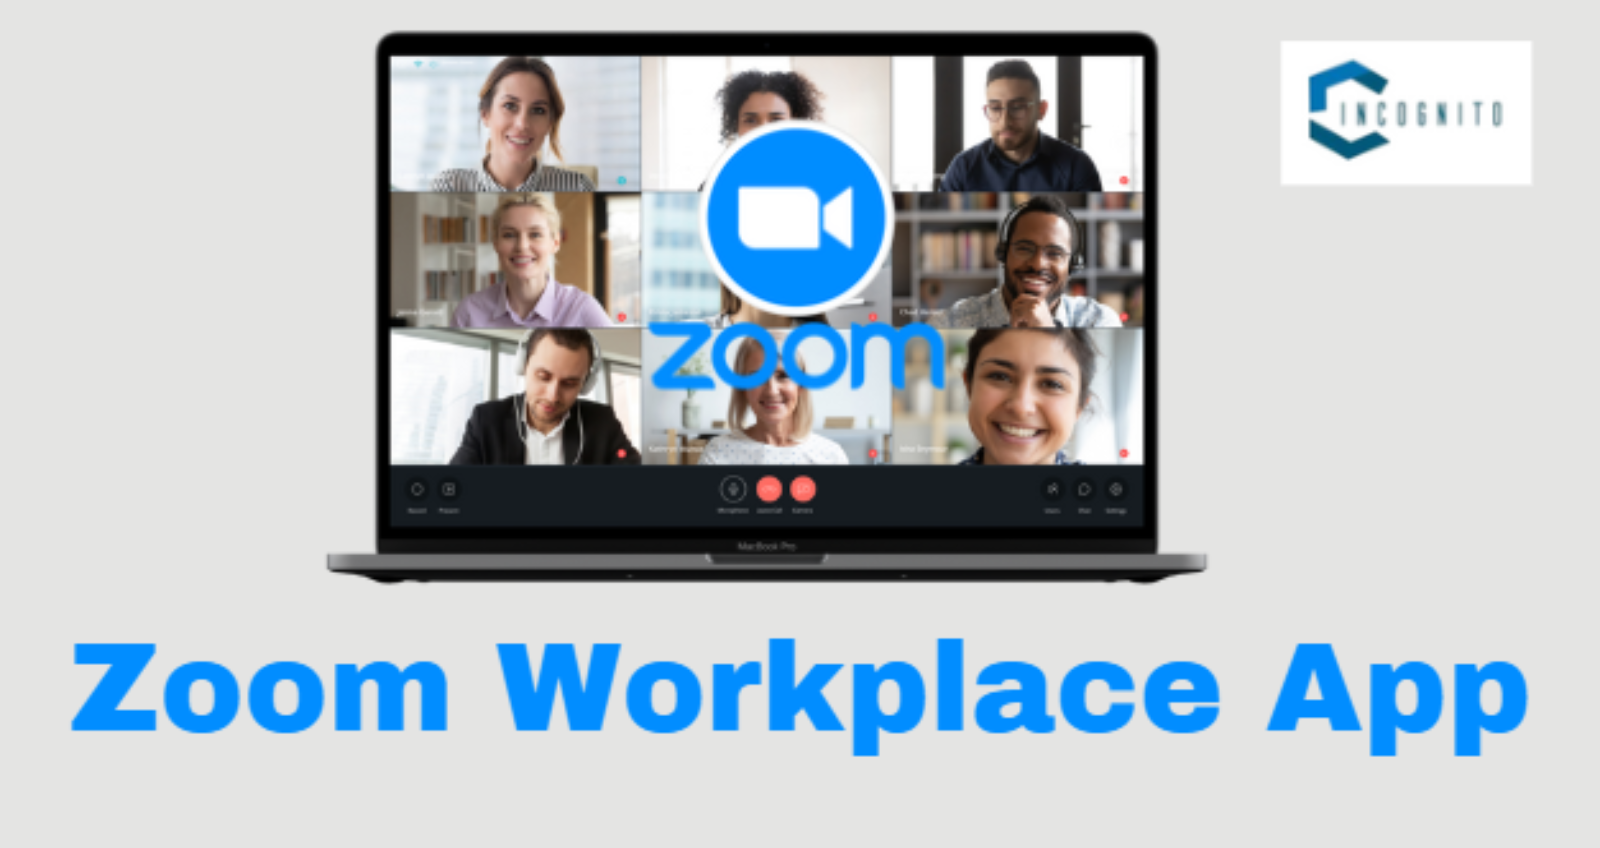 Zoom Workplace App: All-In-One Communication and Collaboration Platform 